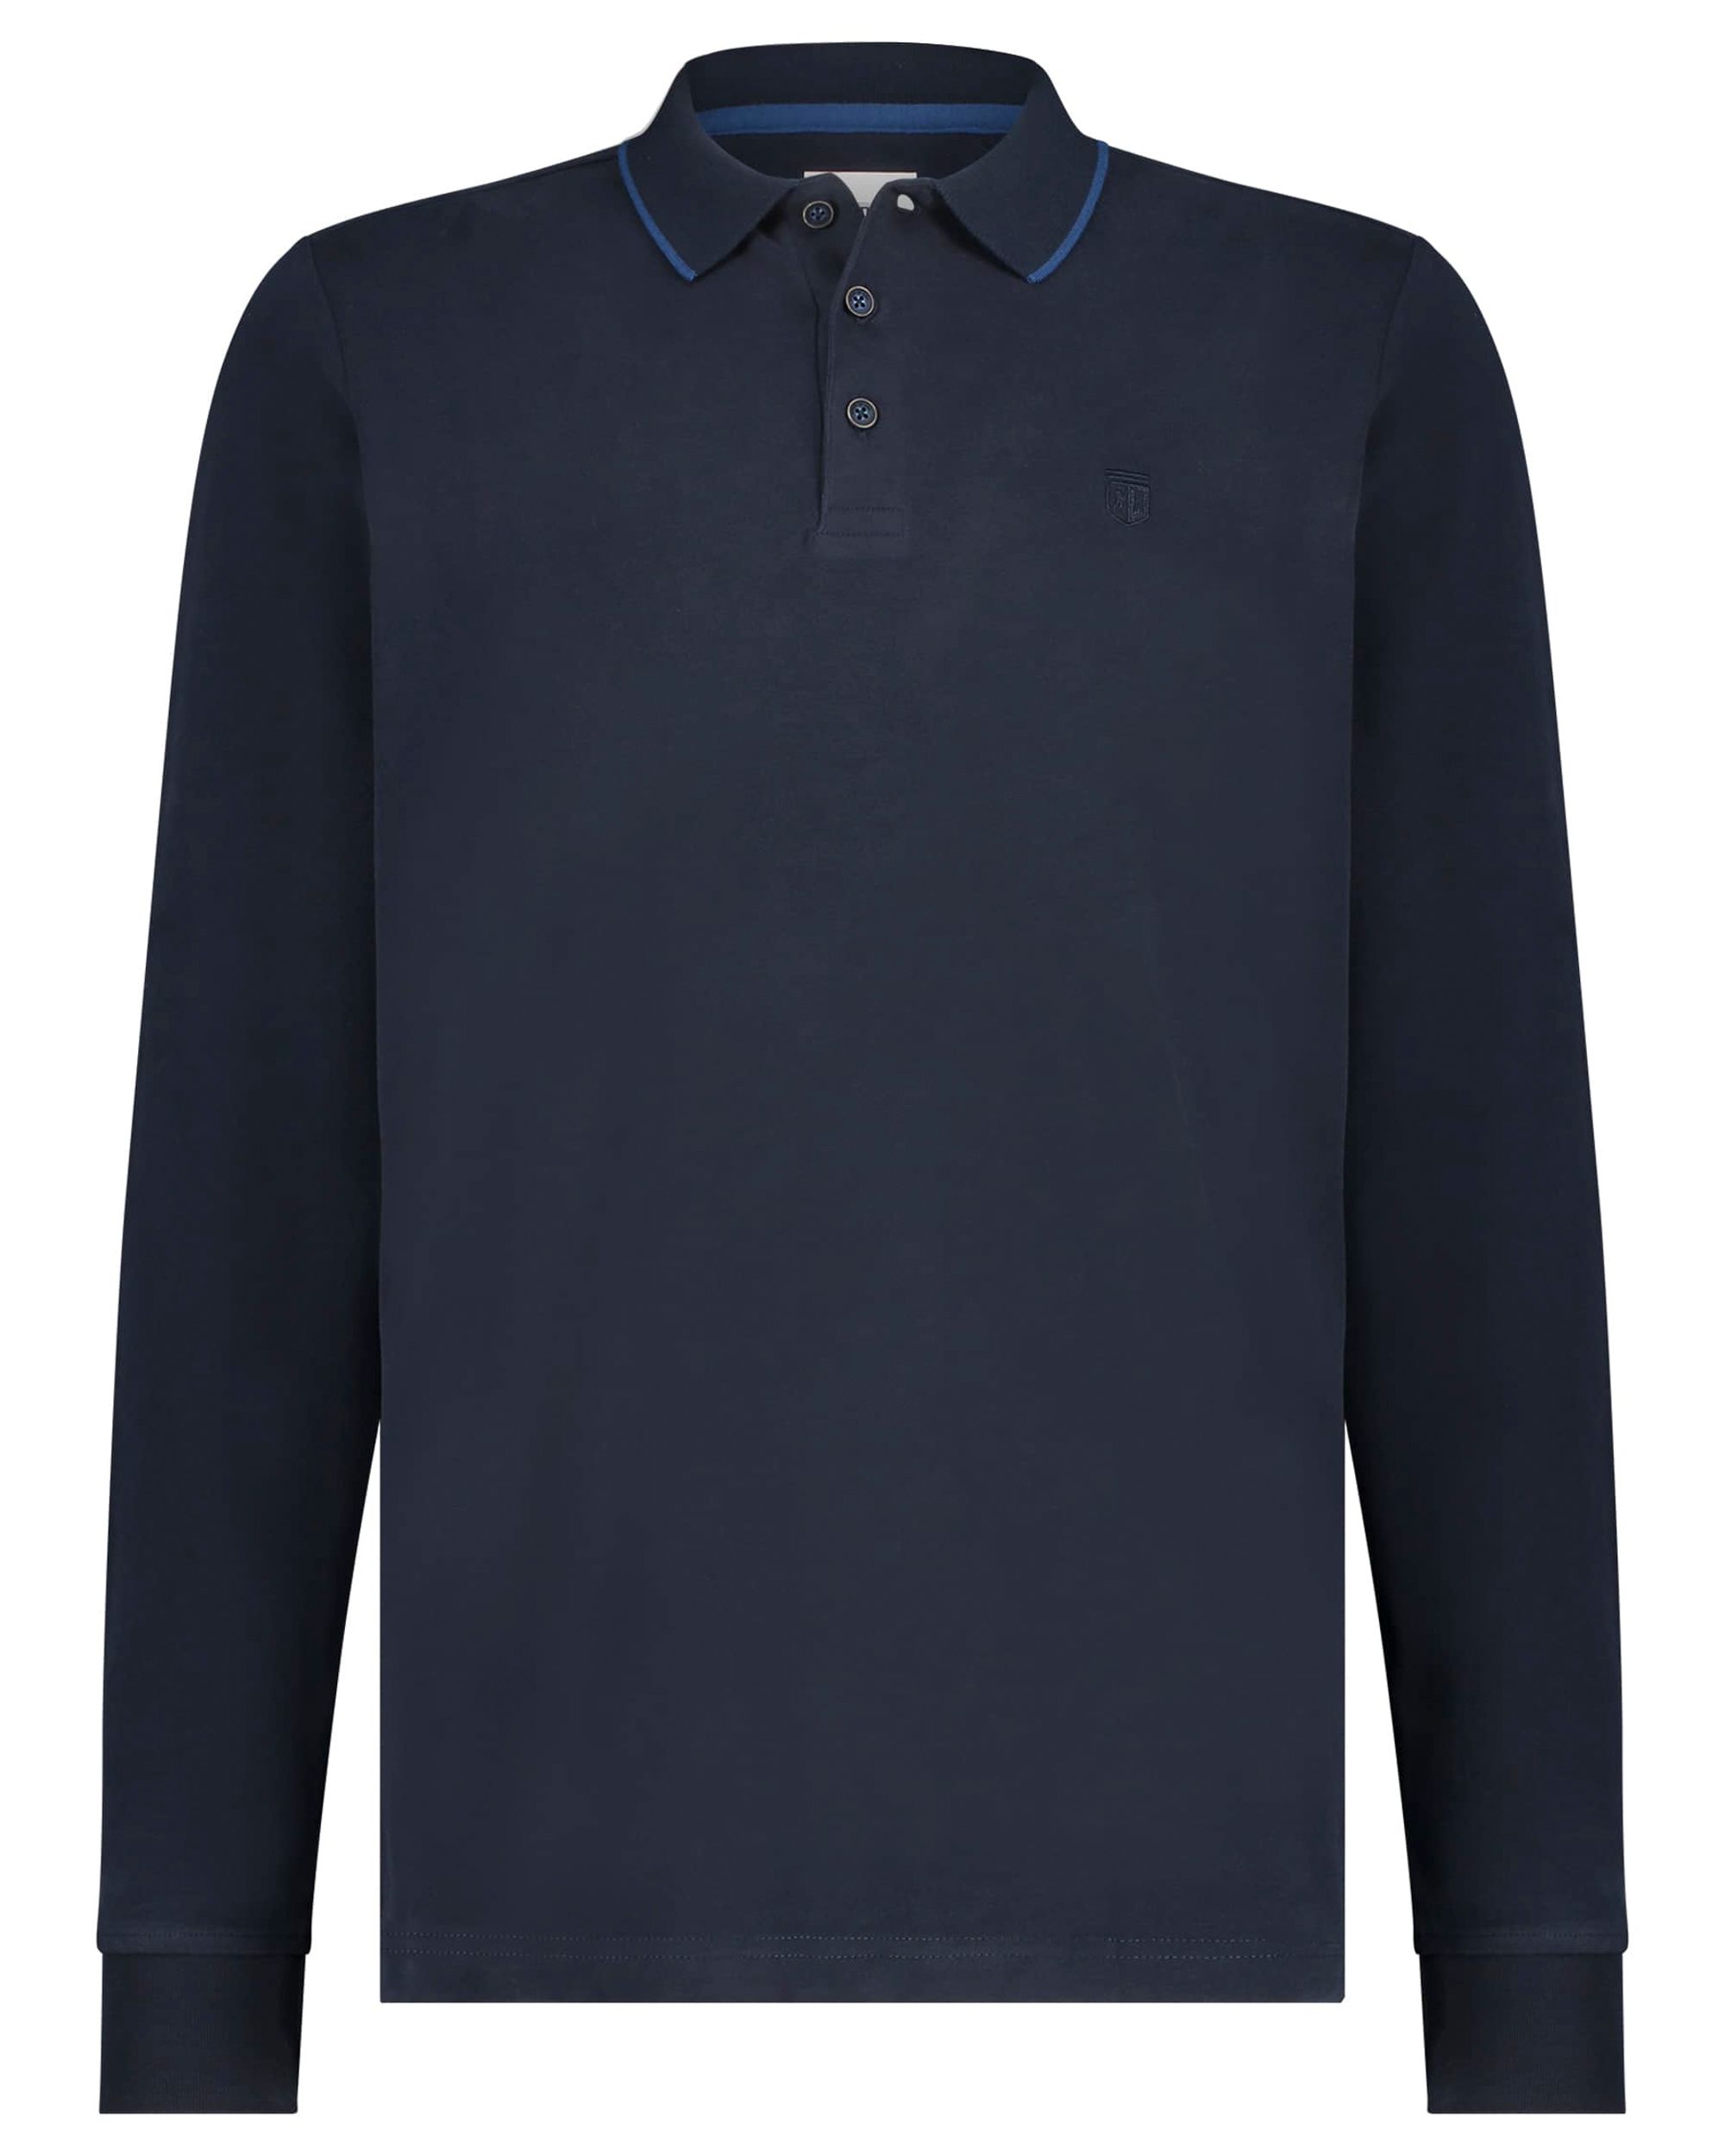 State of Art Polo LM Donker blauw 081115-001-4XL